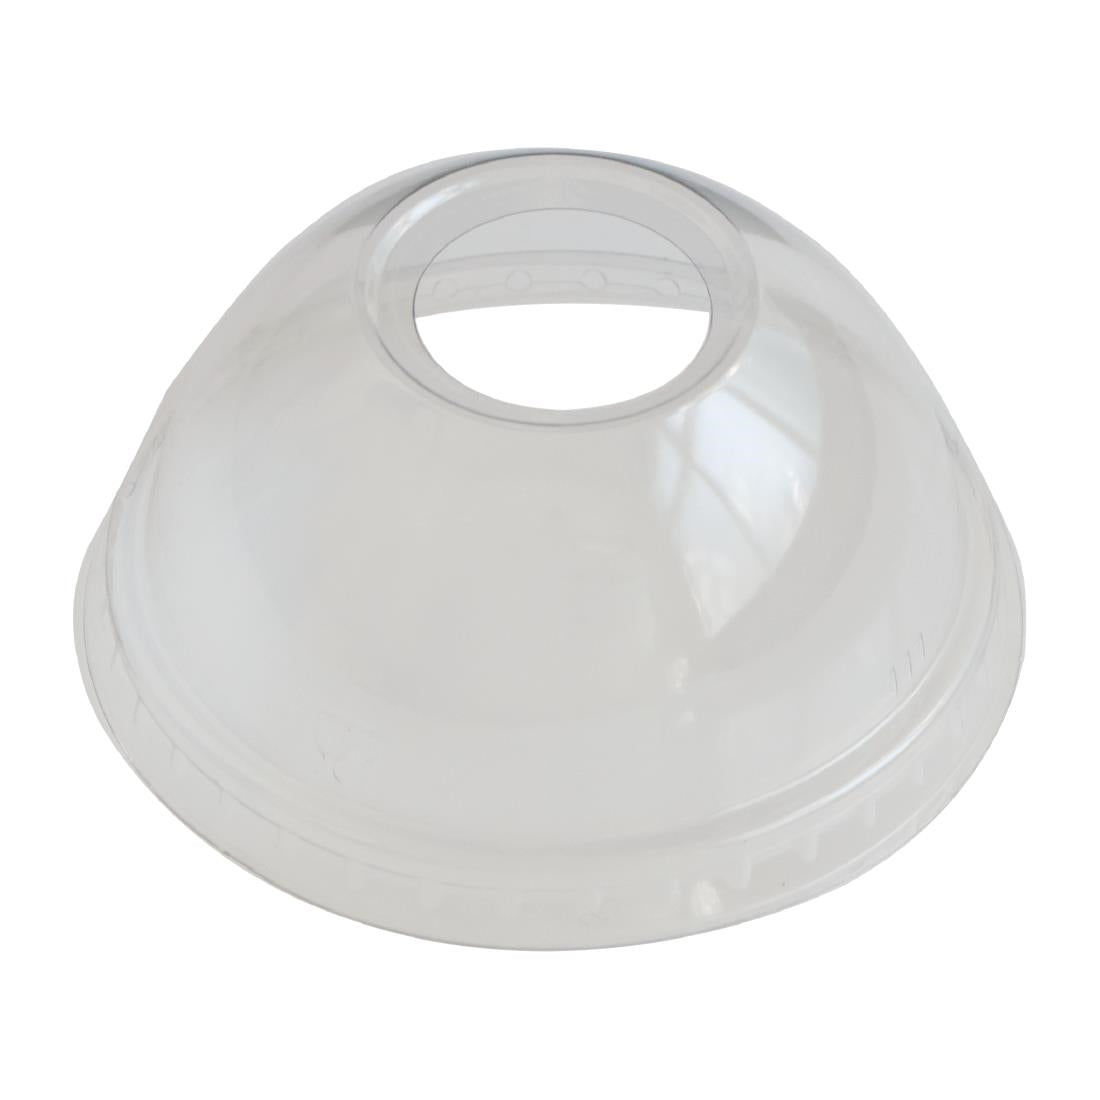 FN224 eGreen RPET Dome Lid with Straw Hole 93mm (Pack of 1000) JD Catering Equipment Solutions Ltd